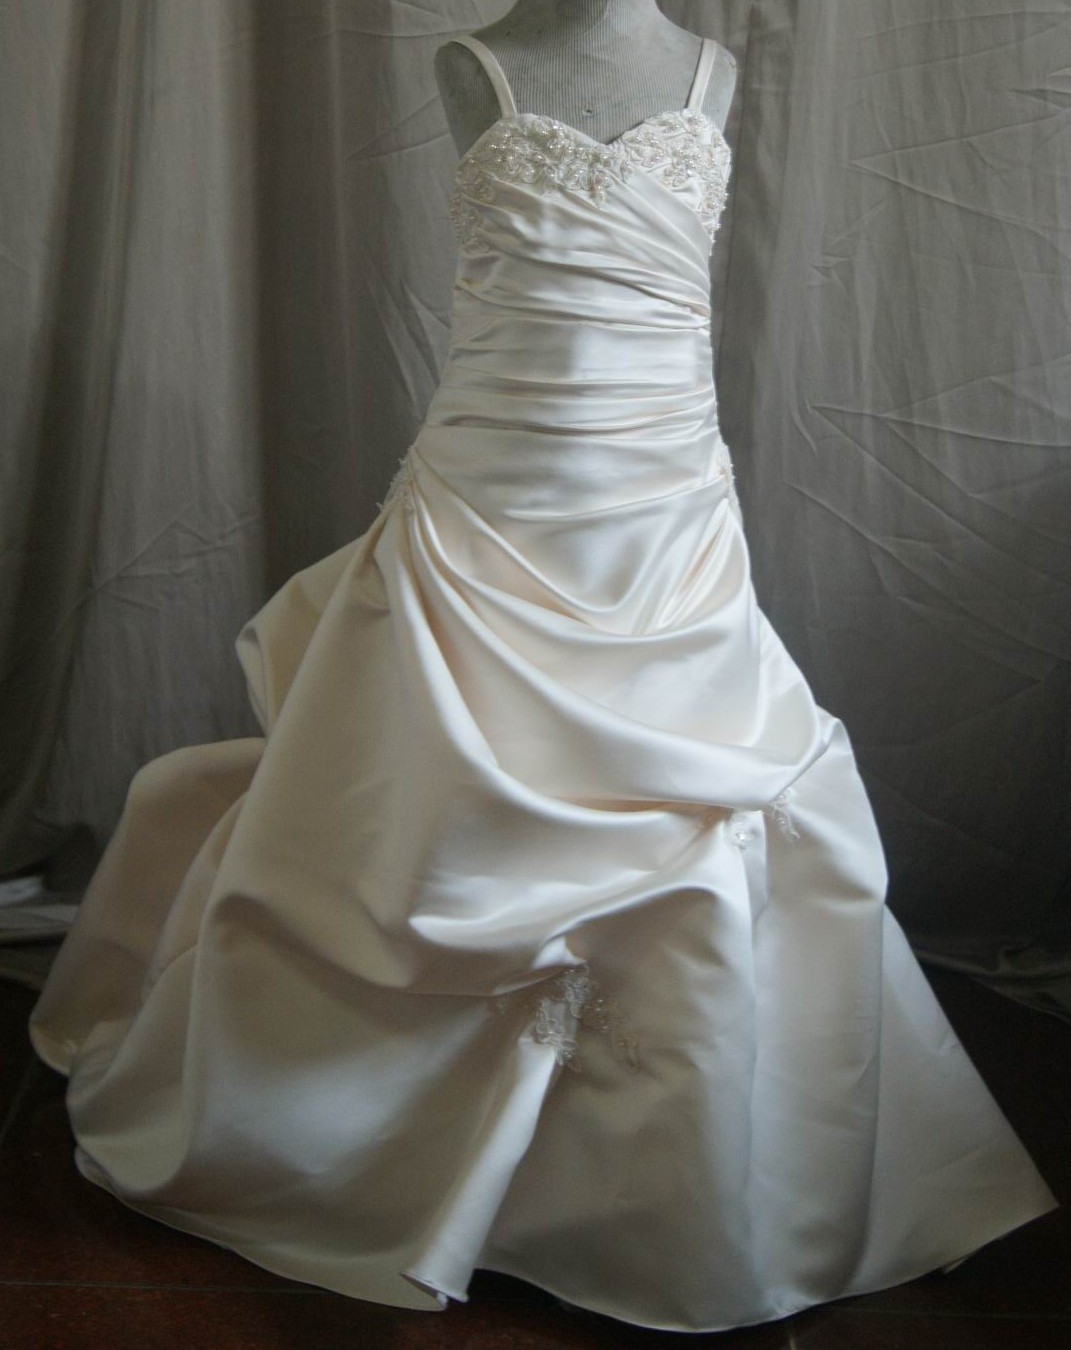 Miniature Bridal Wedding Gown with cascading bubble train